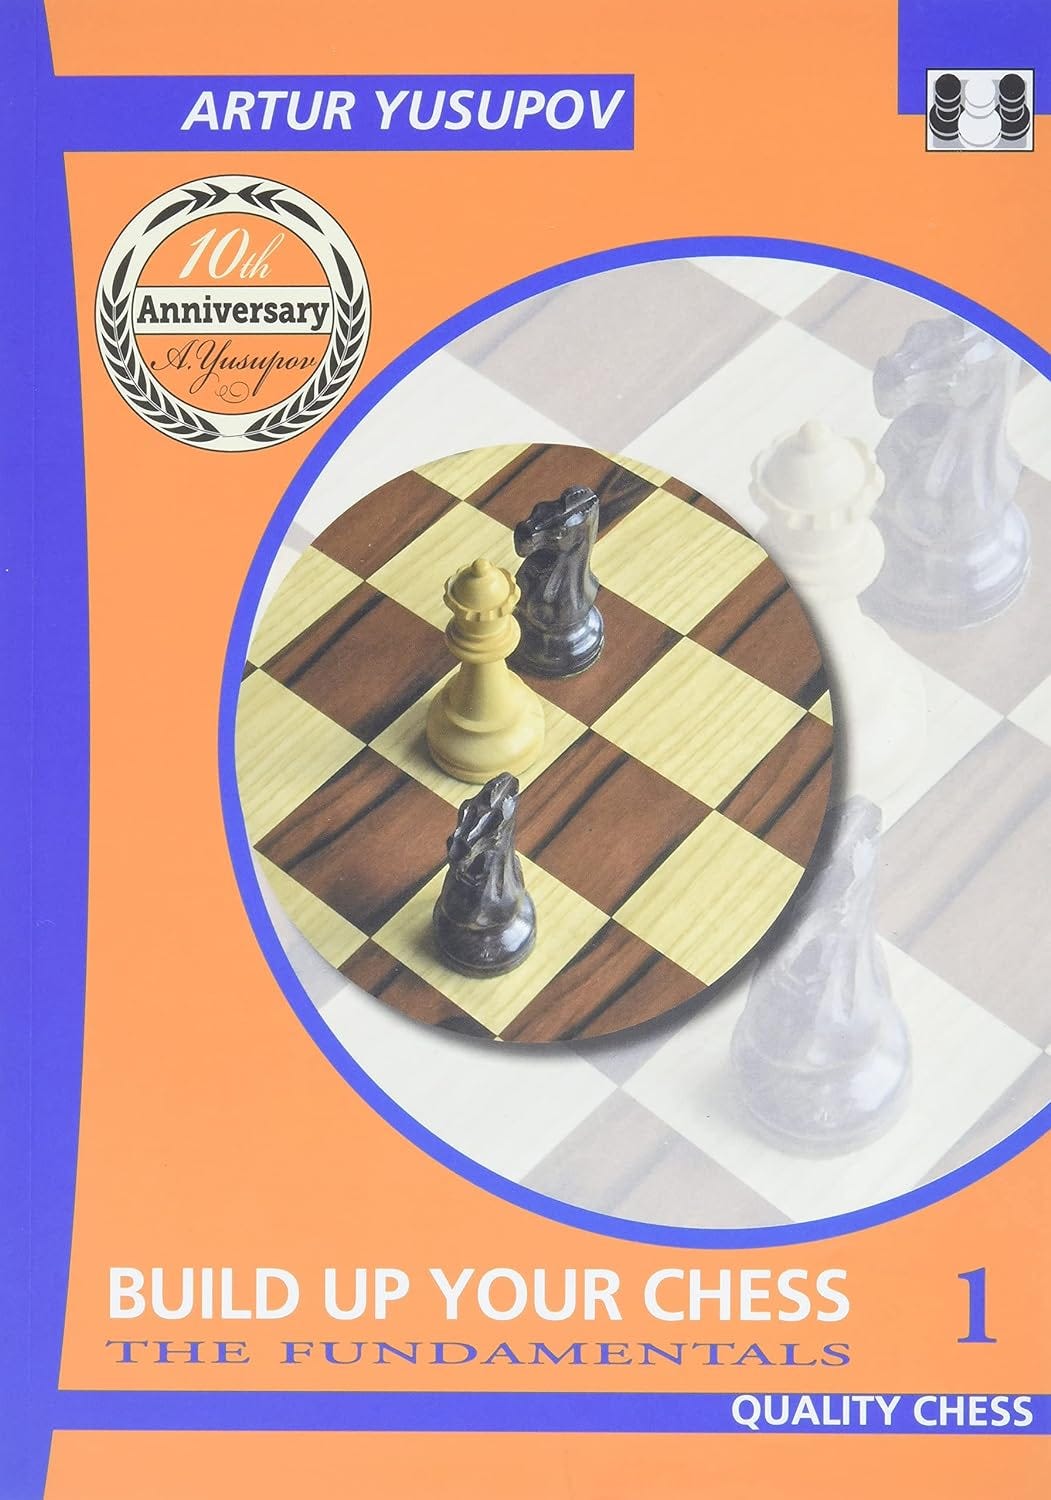 SayChessClassical's Blog • Do You Google Your Chess Knowledge? •